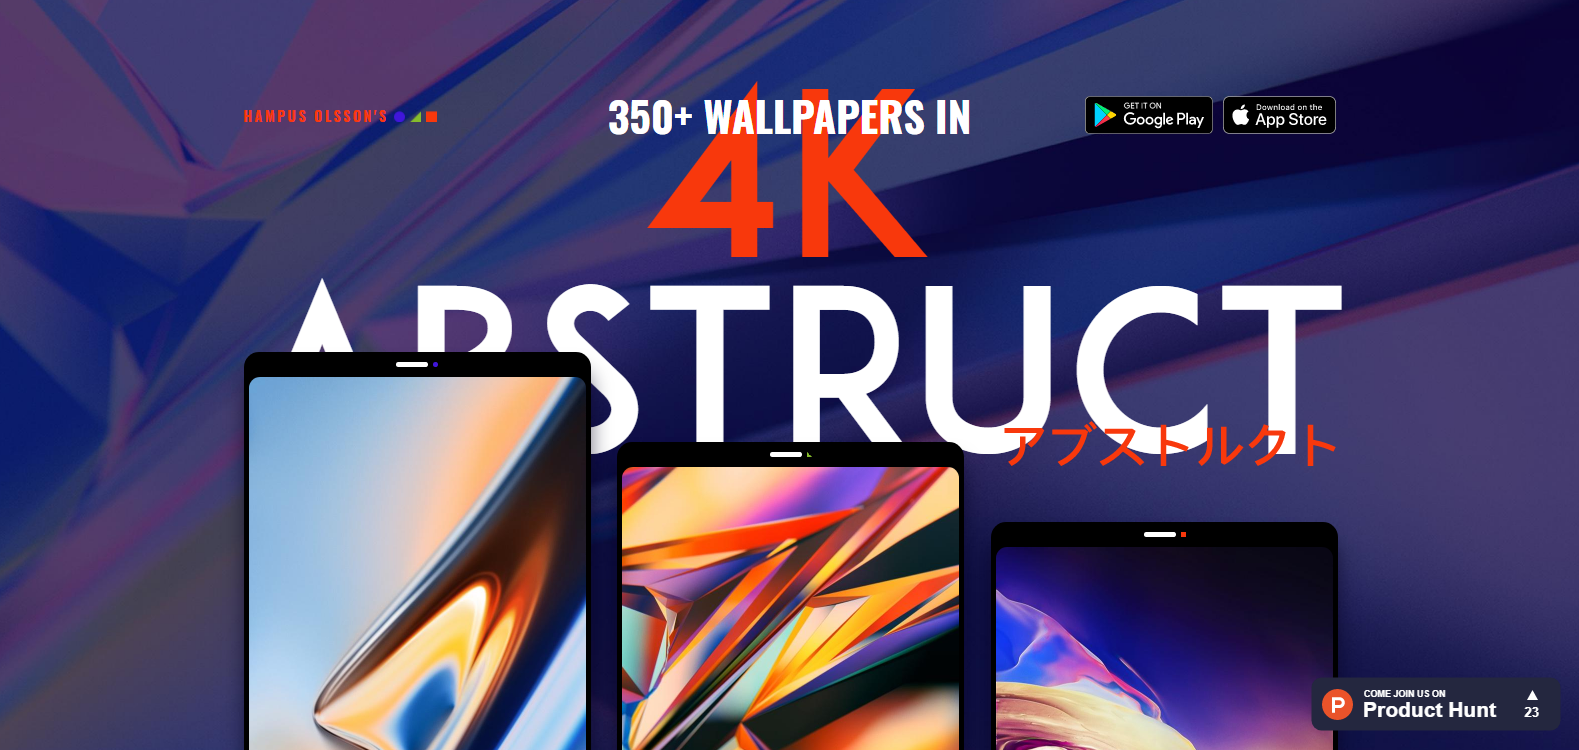 Free wallpapers for android abstruct app